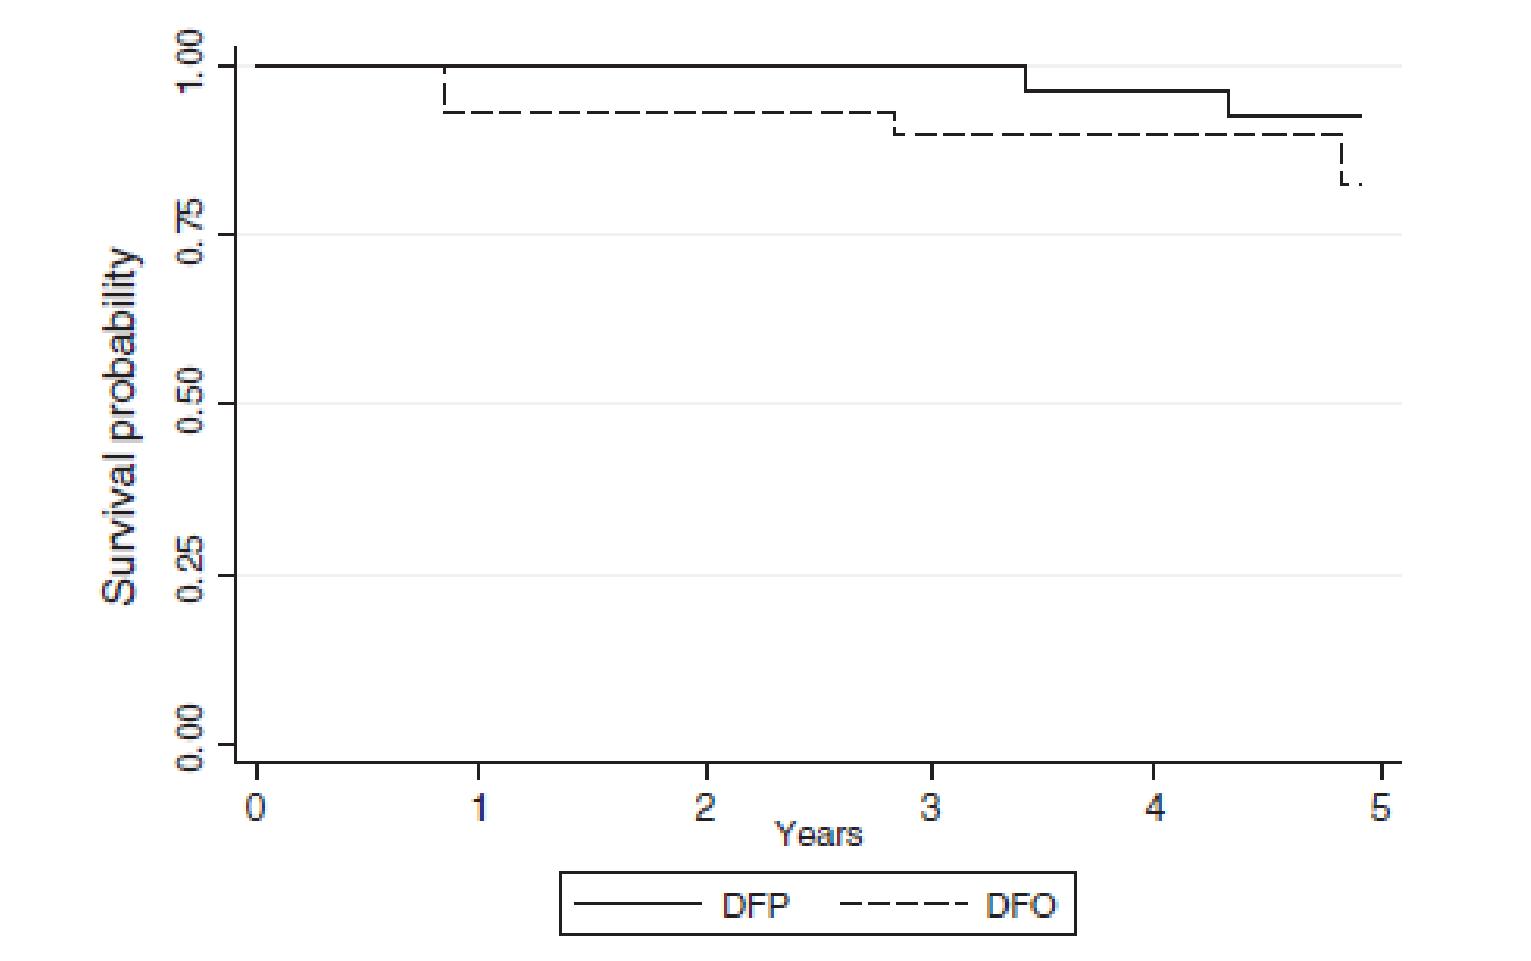 Survival curves of both treatment groups. Both curves start at a probability of 1.0 and decline gradually for 5 years until the probability is approximately 0.95 for the DFO group and 0.95 for the DFP group.